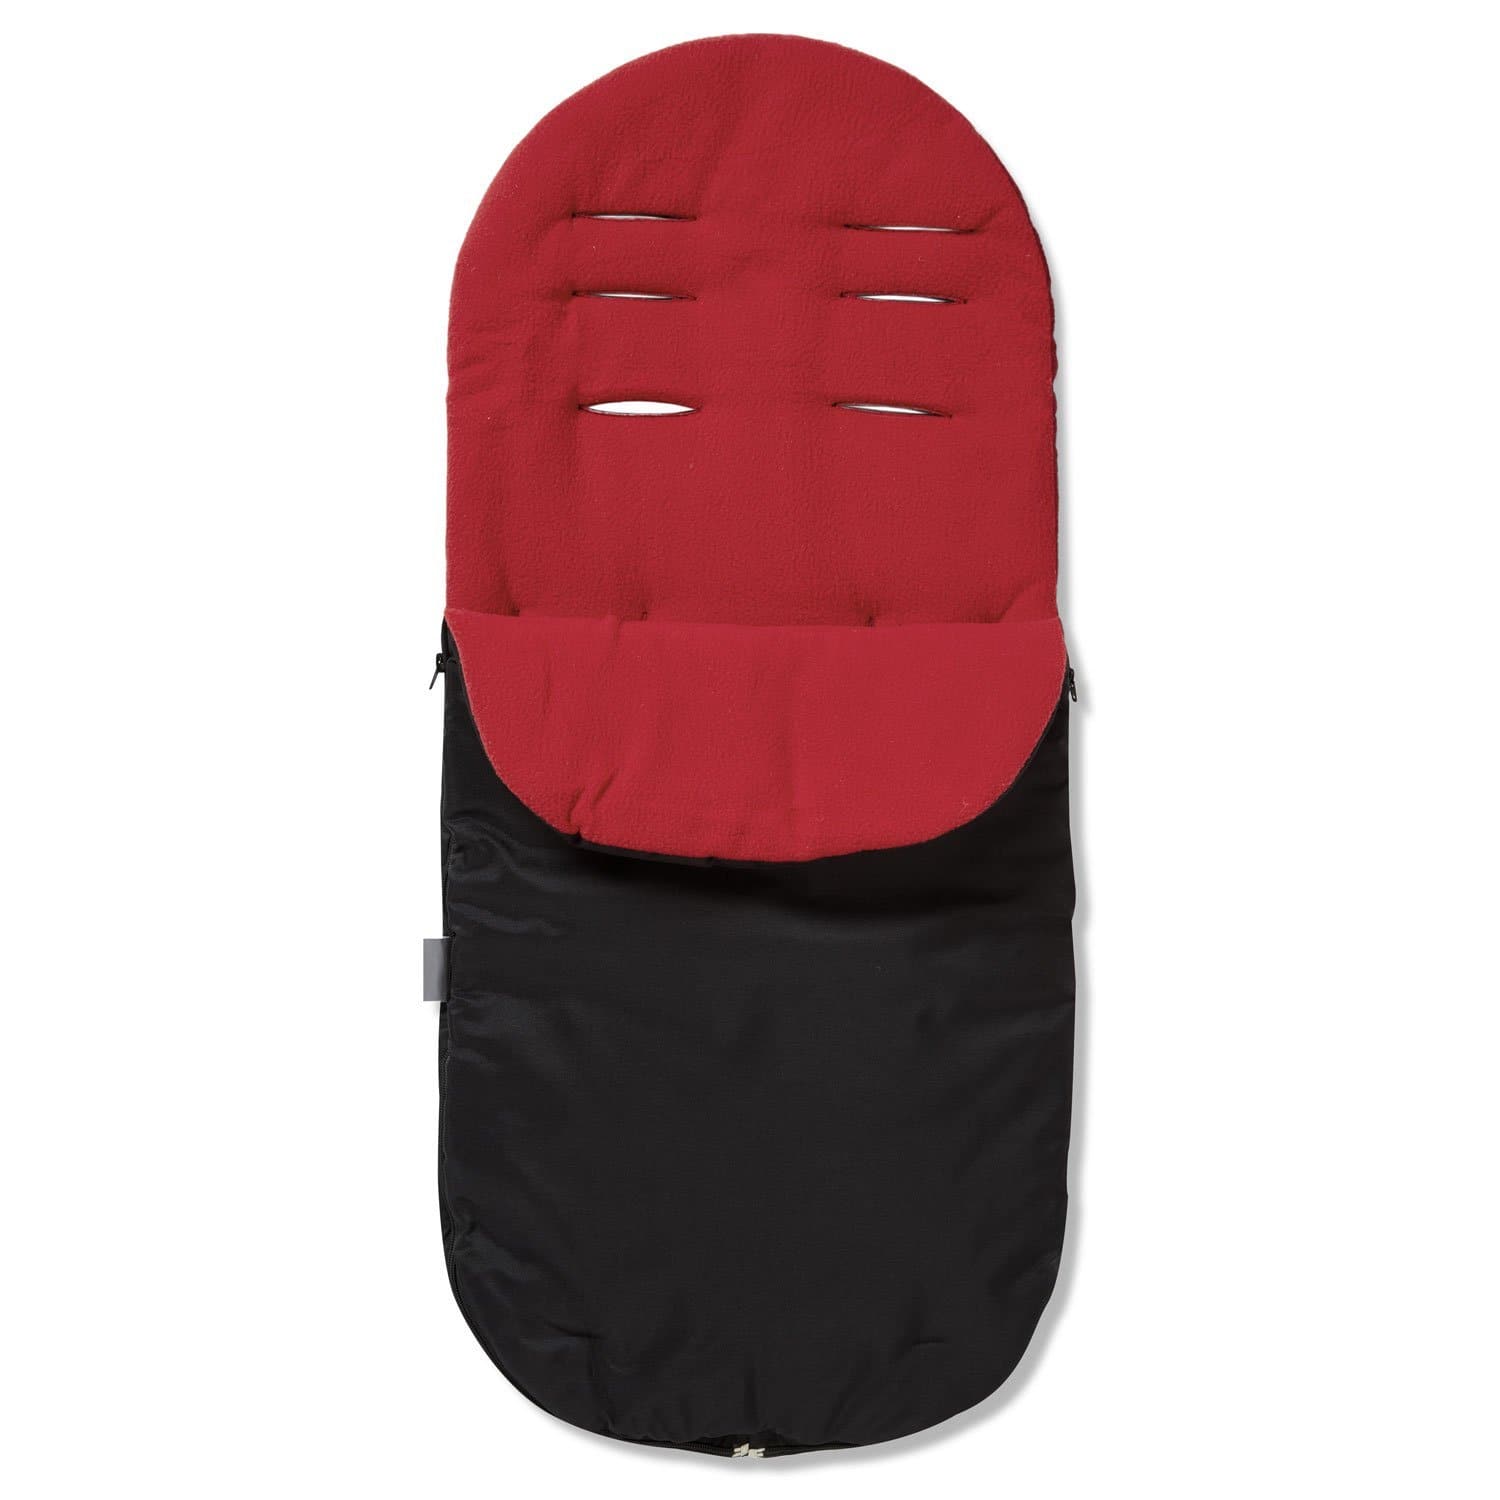 Footmuff / Cosy Toes Compatible with Kinderkraft - Red / Fits All Models | For Your Little One